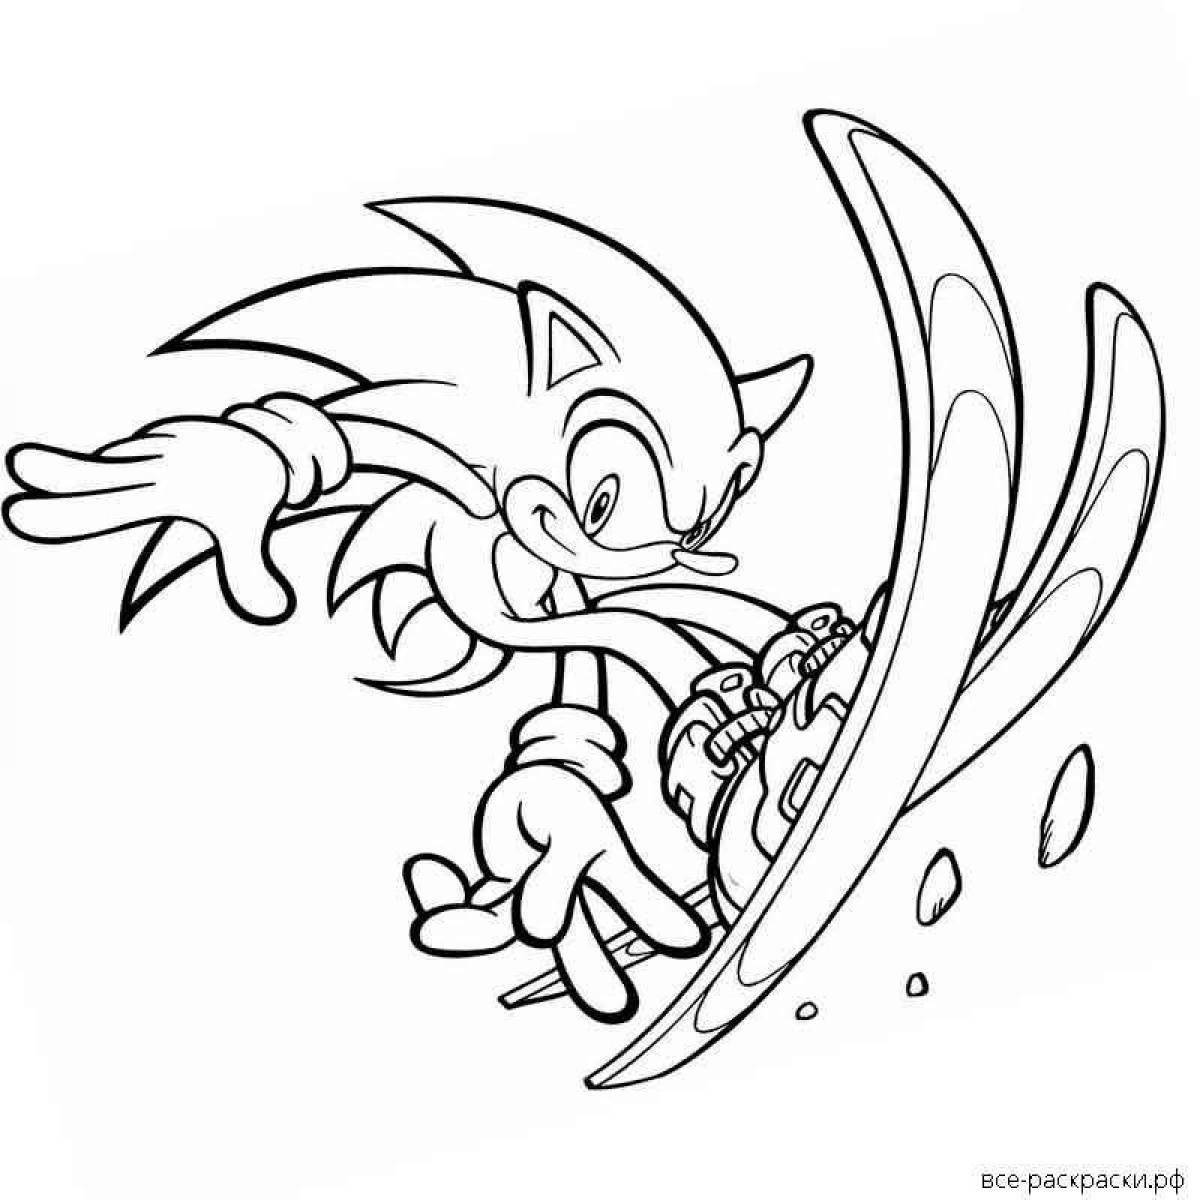 Tempting sonic movie 2 coloring book